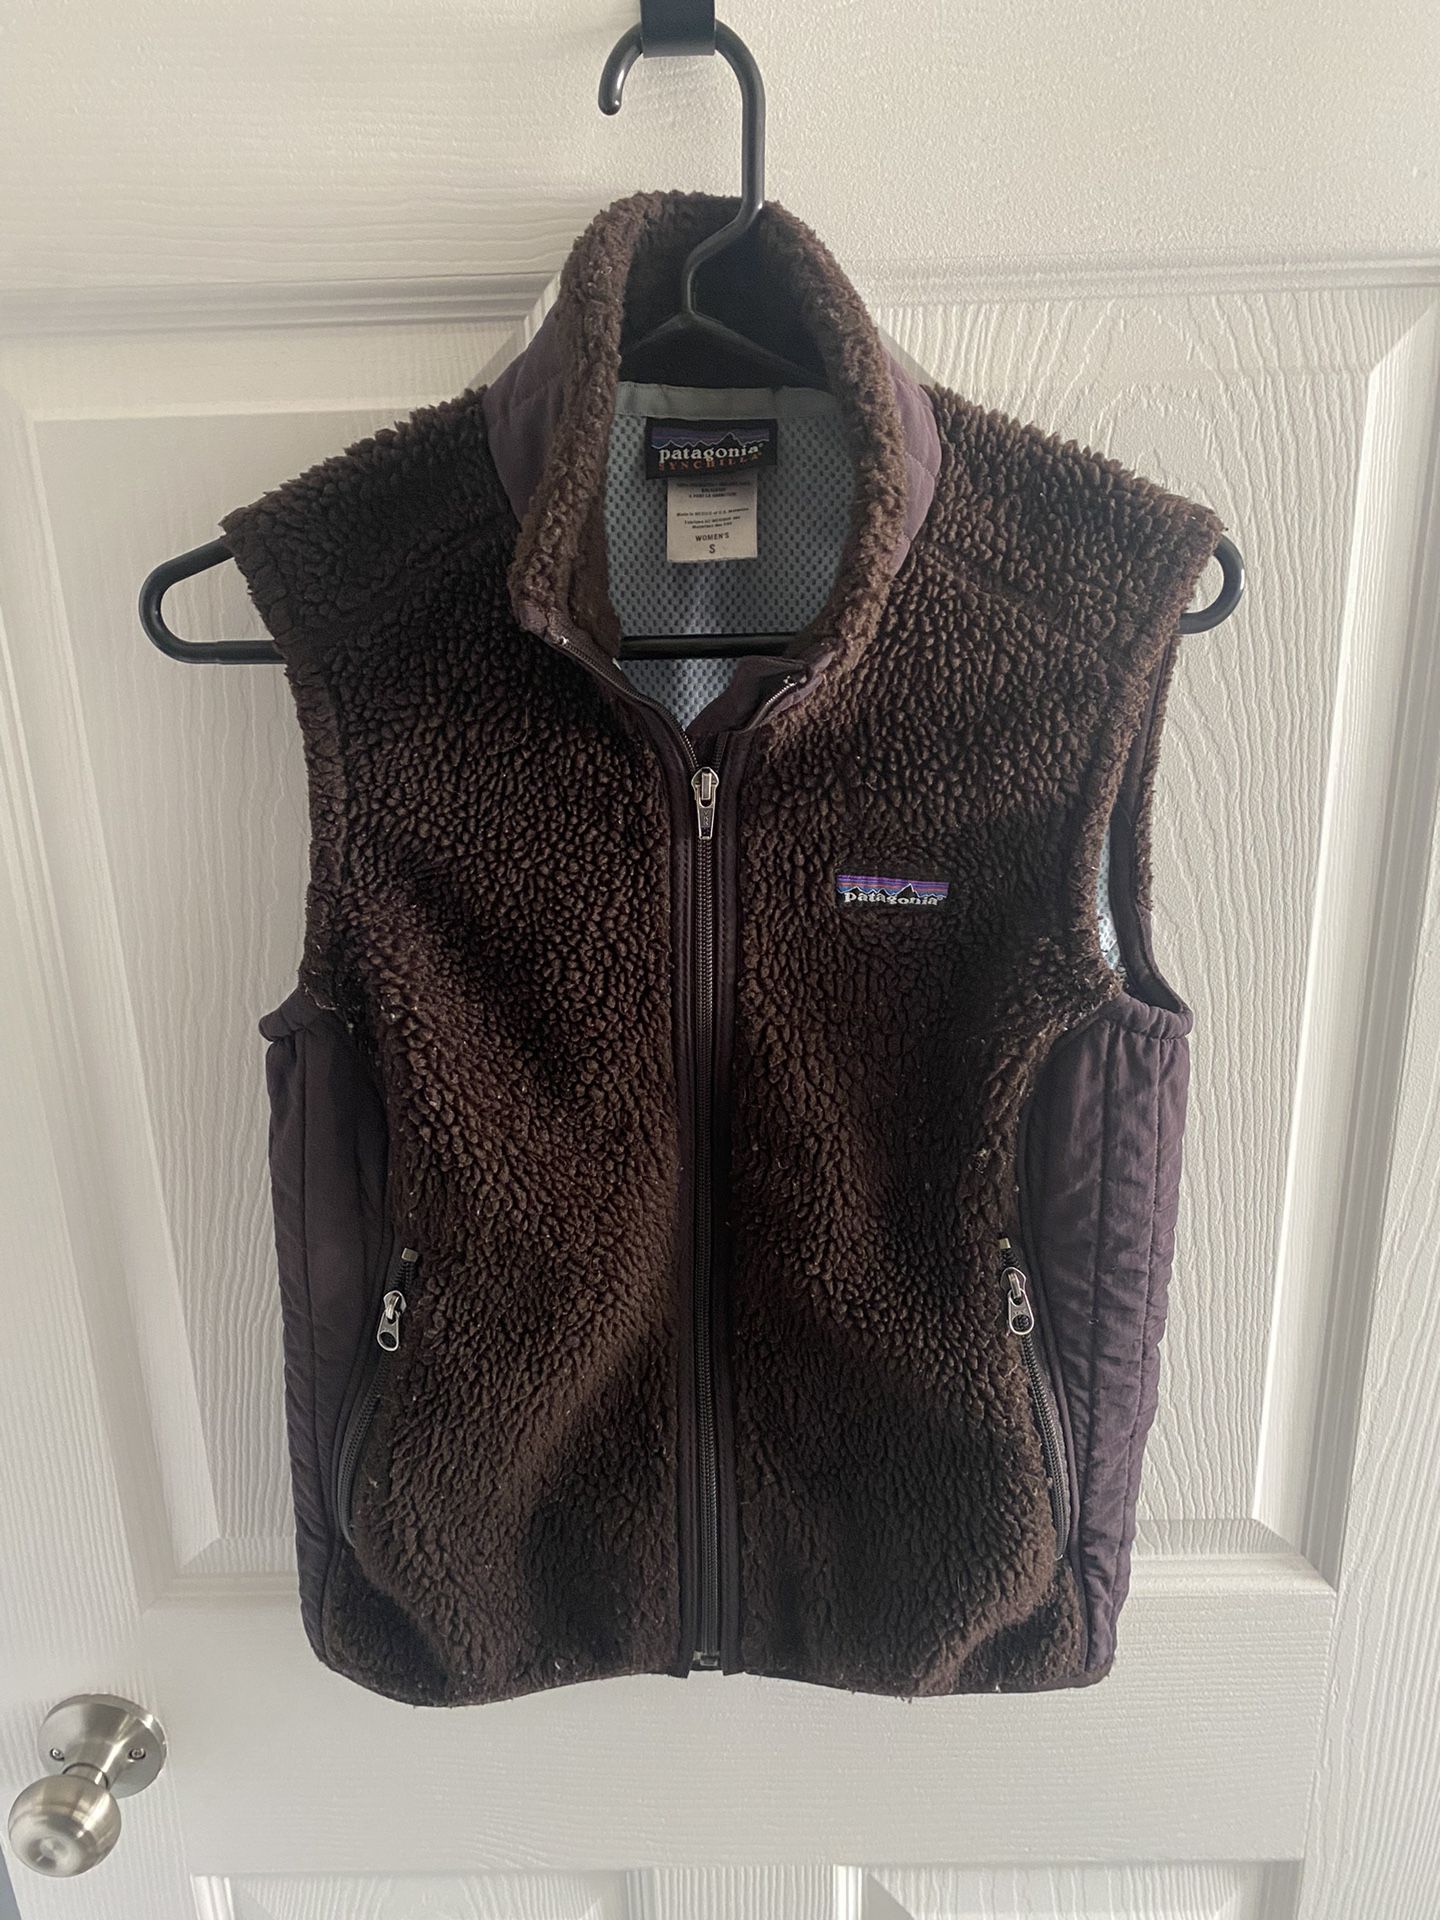 Women’s Patagonia S Small Vest EUC Fast Shipping Classic Clothing USA Athletic